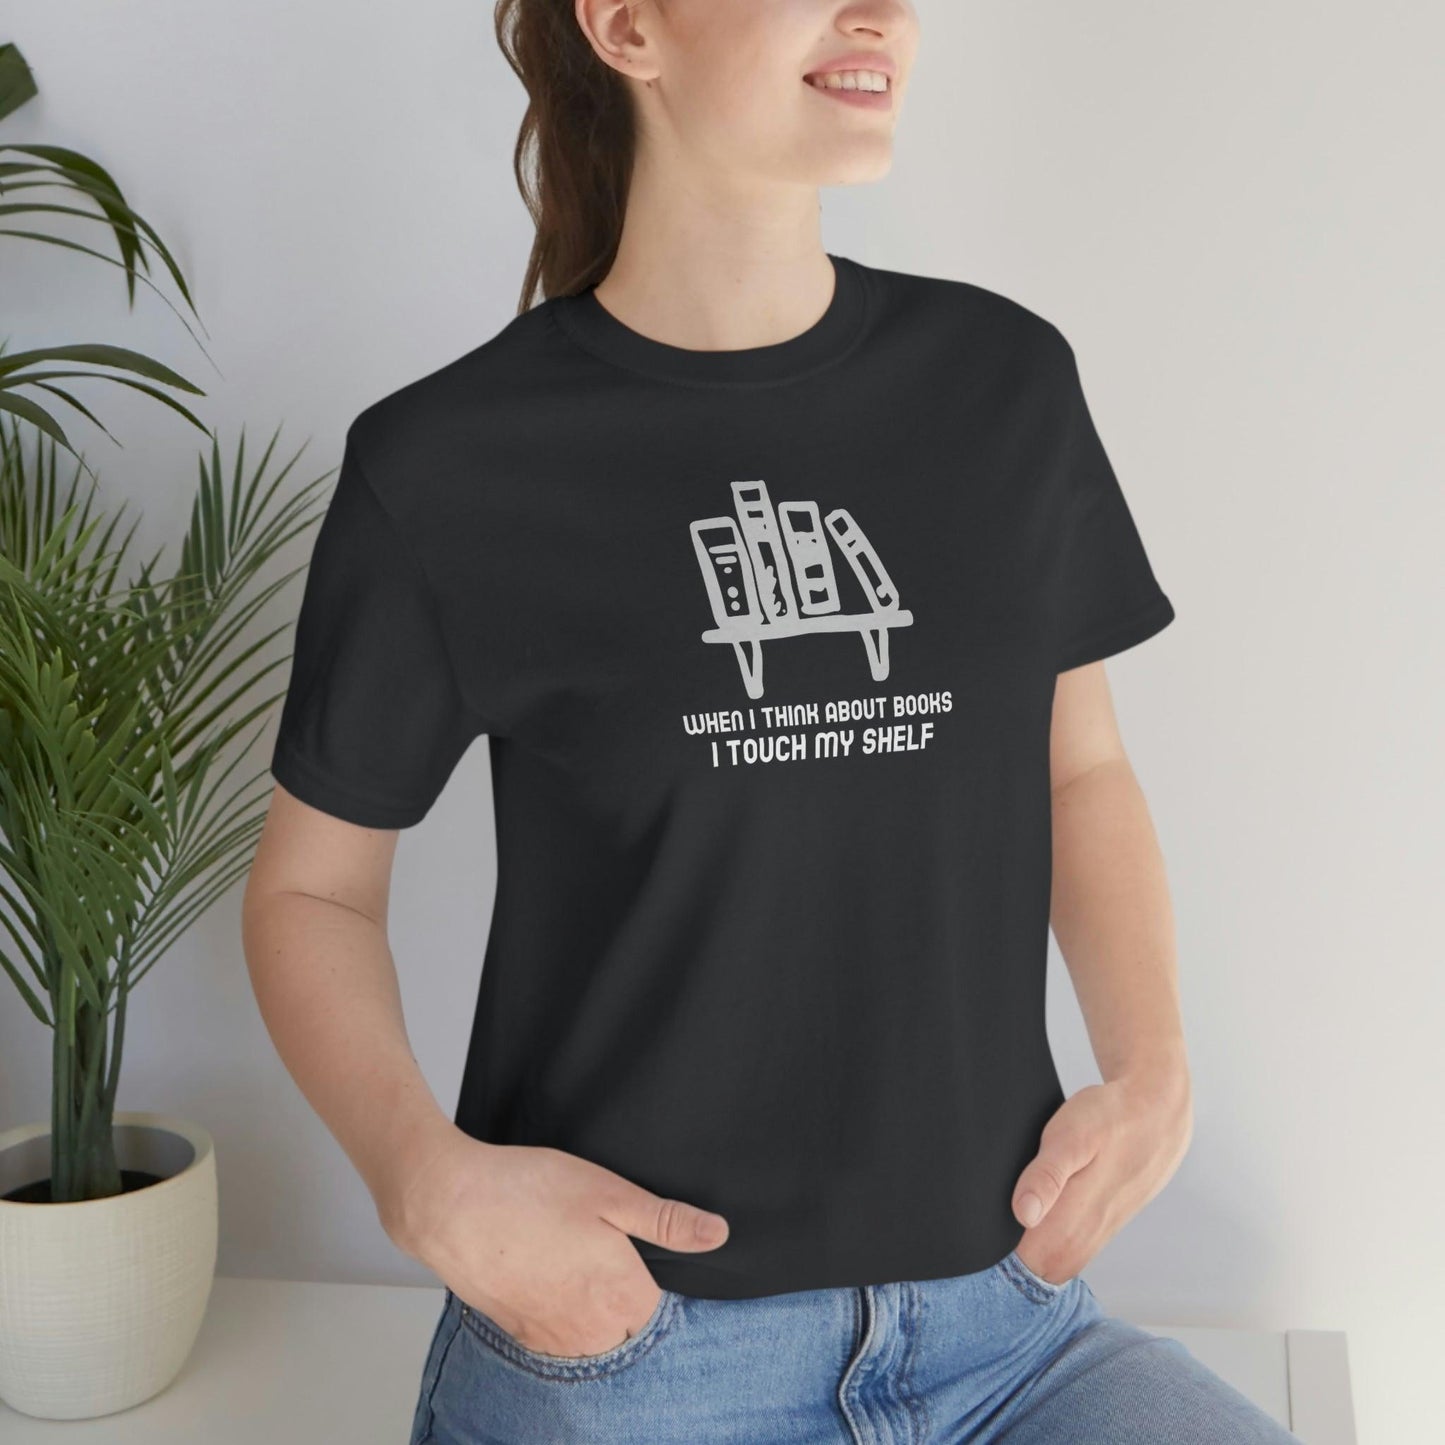 When I think about books, I touch my shelf - Wicked Naughty Apparel